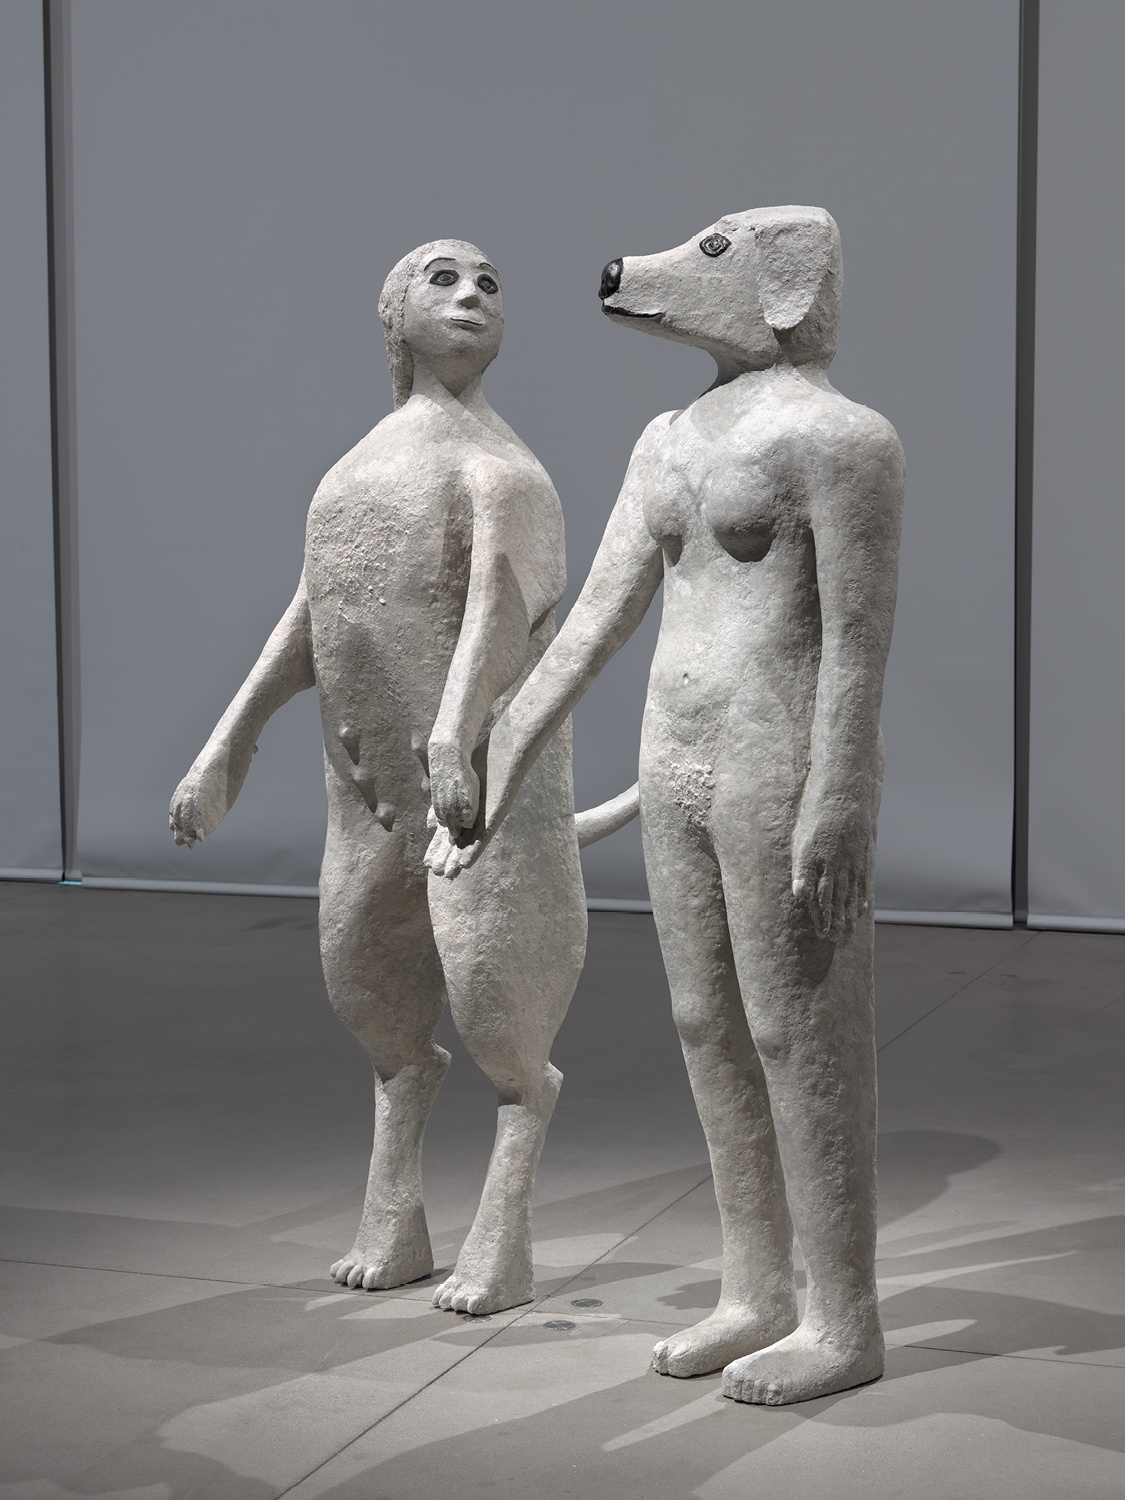 Two sculptures standing side by side. One is a woman with the body of a dog and the other is a dog with the body of a woman. They hold hands.